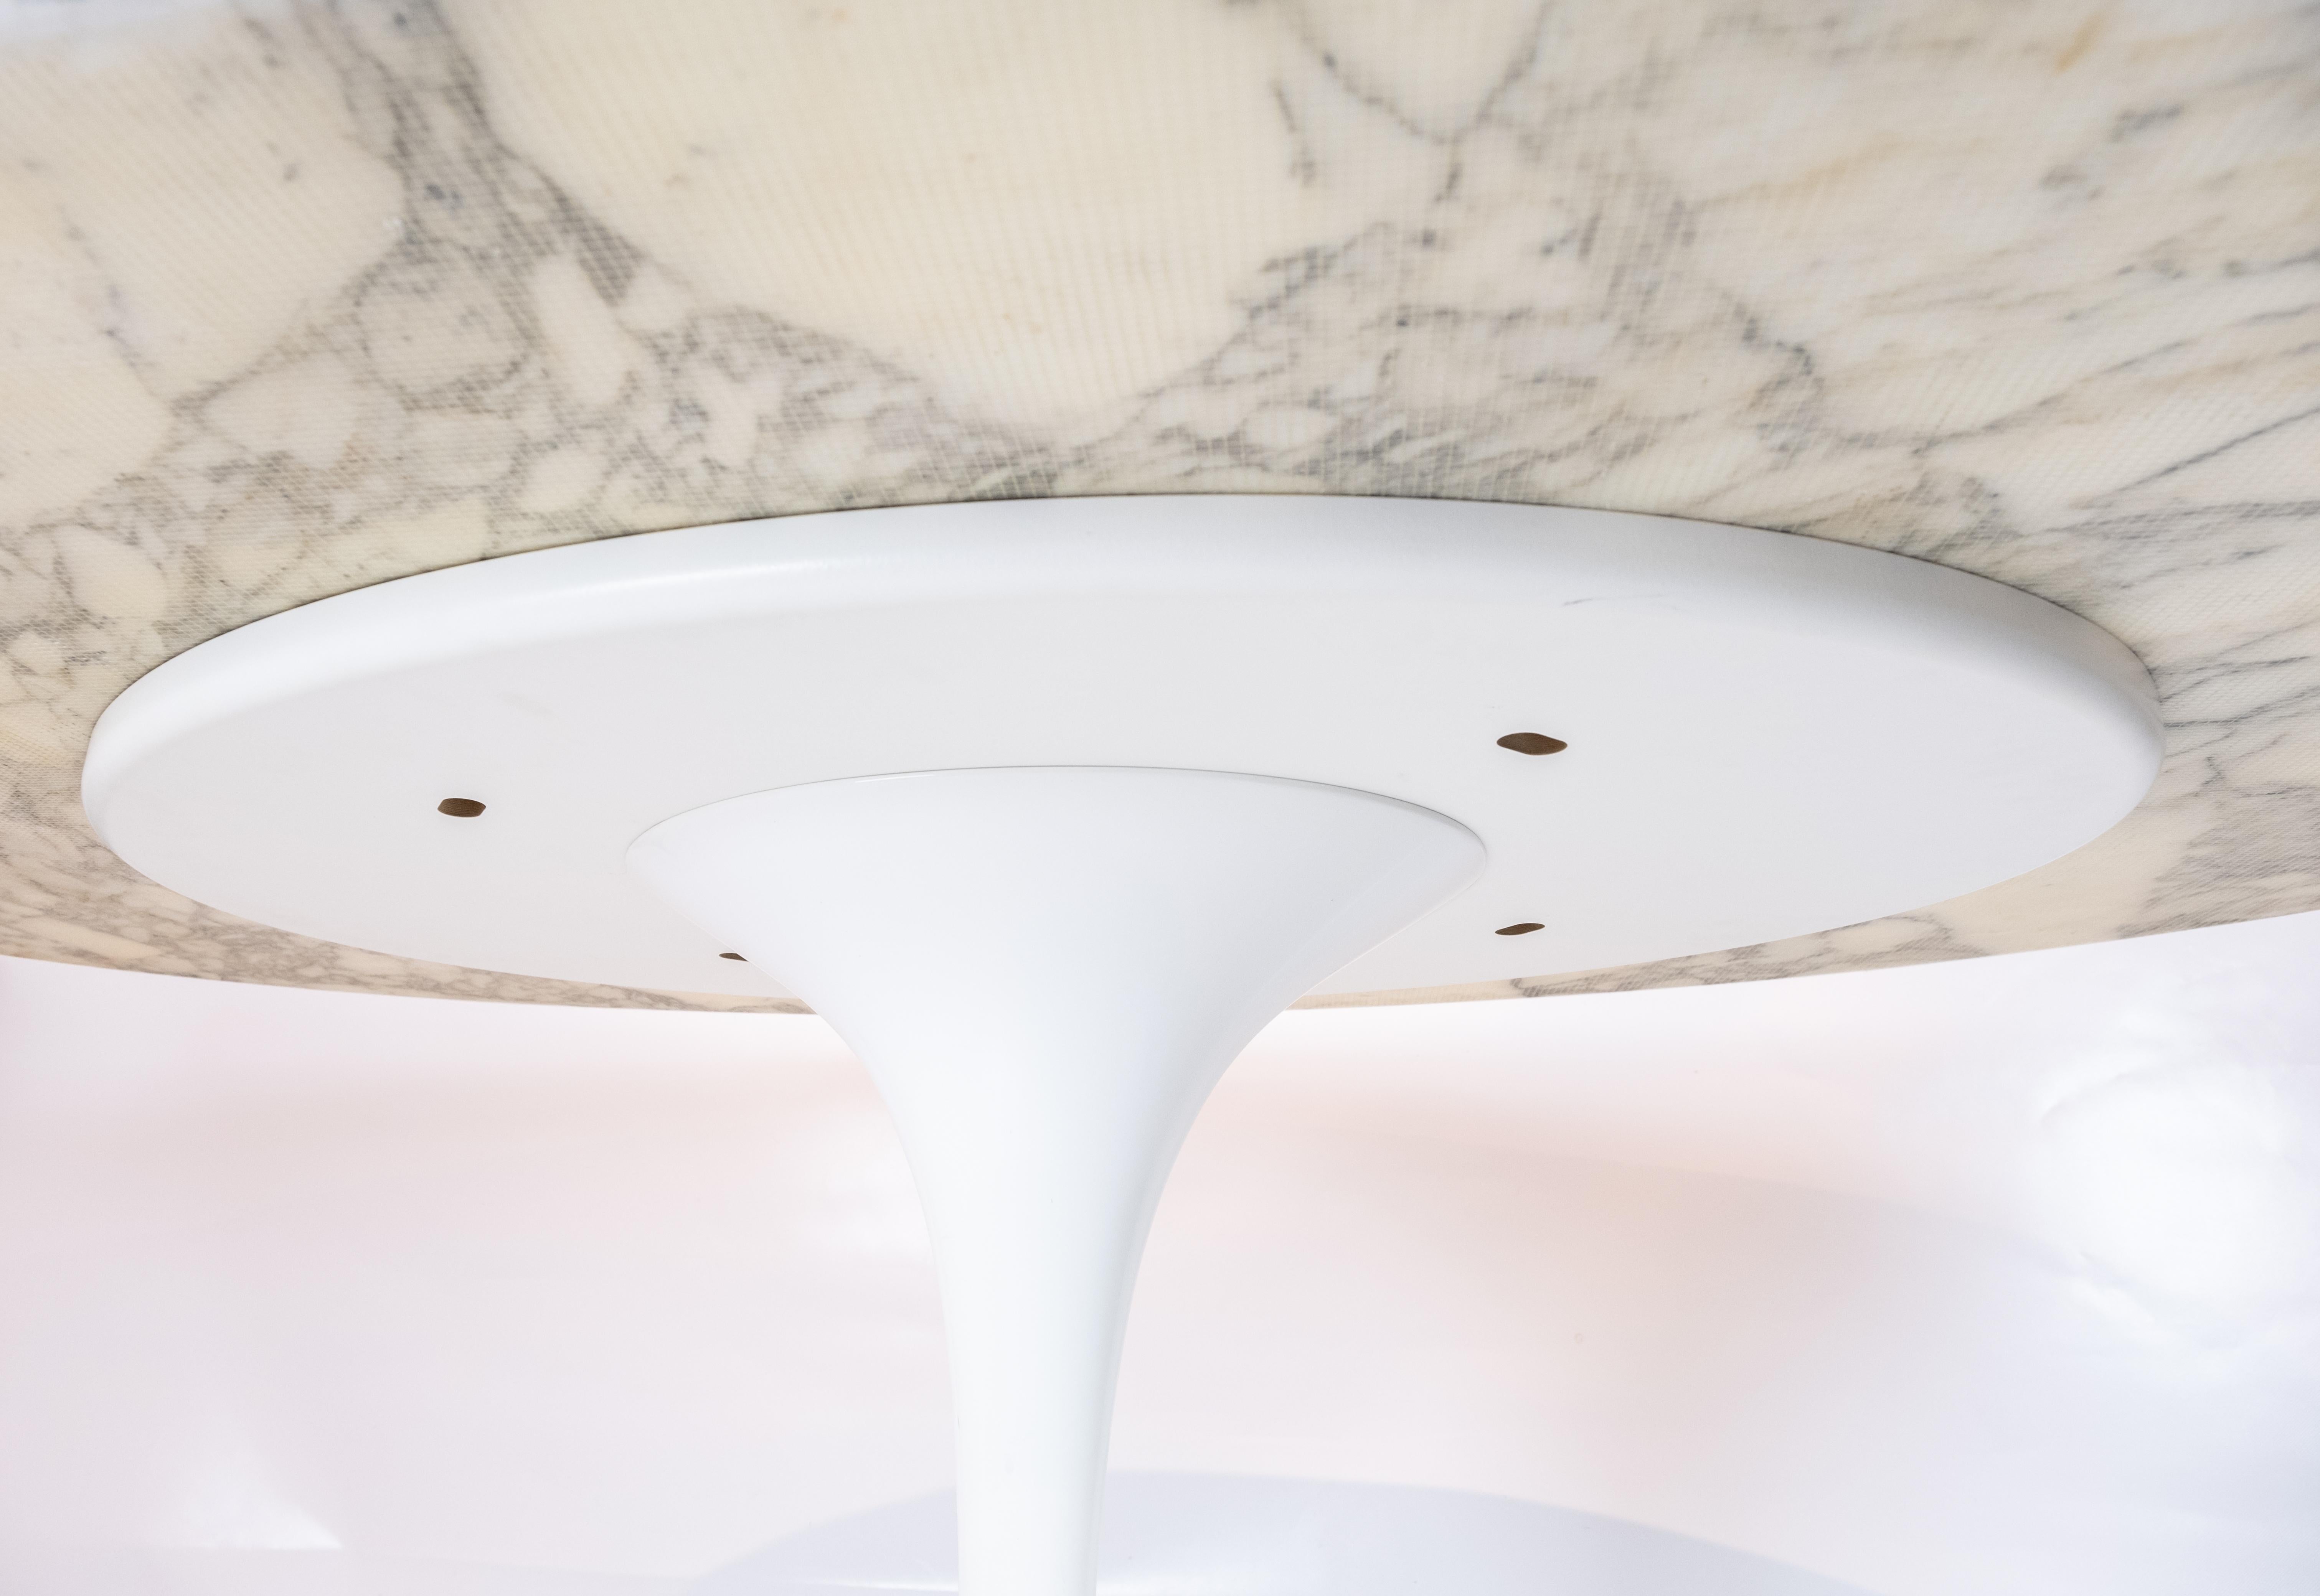 Mid-20th Century Tulip Oval Dining Table with Marble Top Designed by Eero Saarinen in 1957